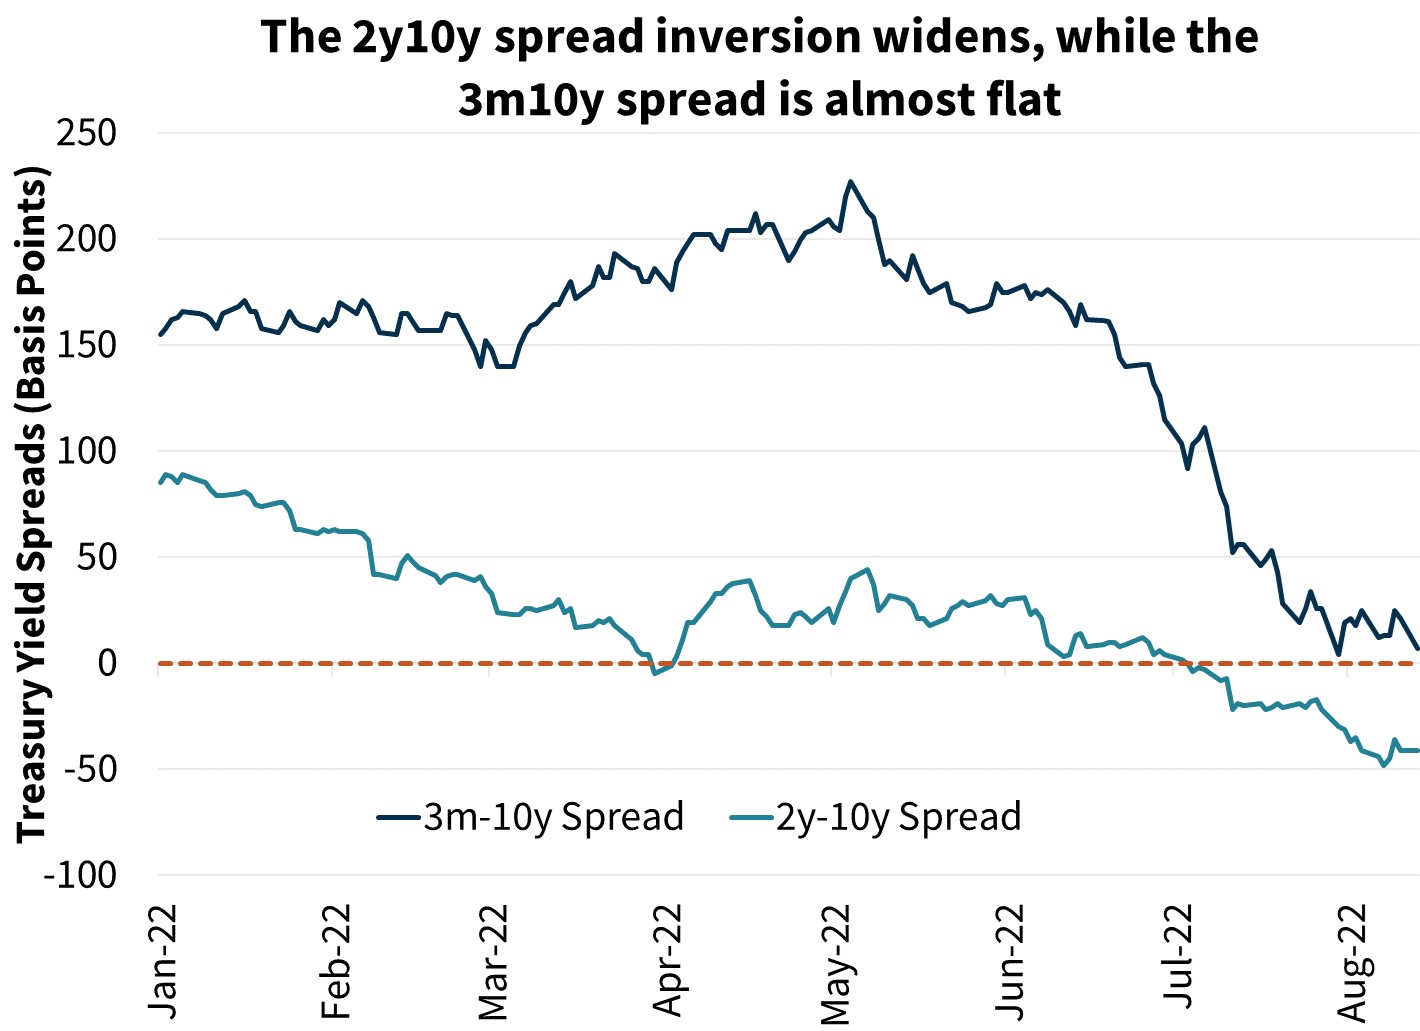  The 2y10y spread inversion widens, while the 3m10y spread is almost flat 